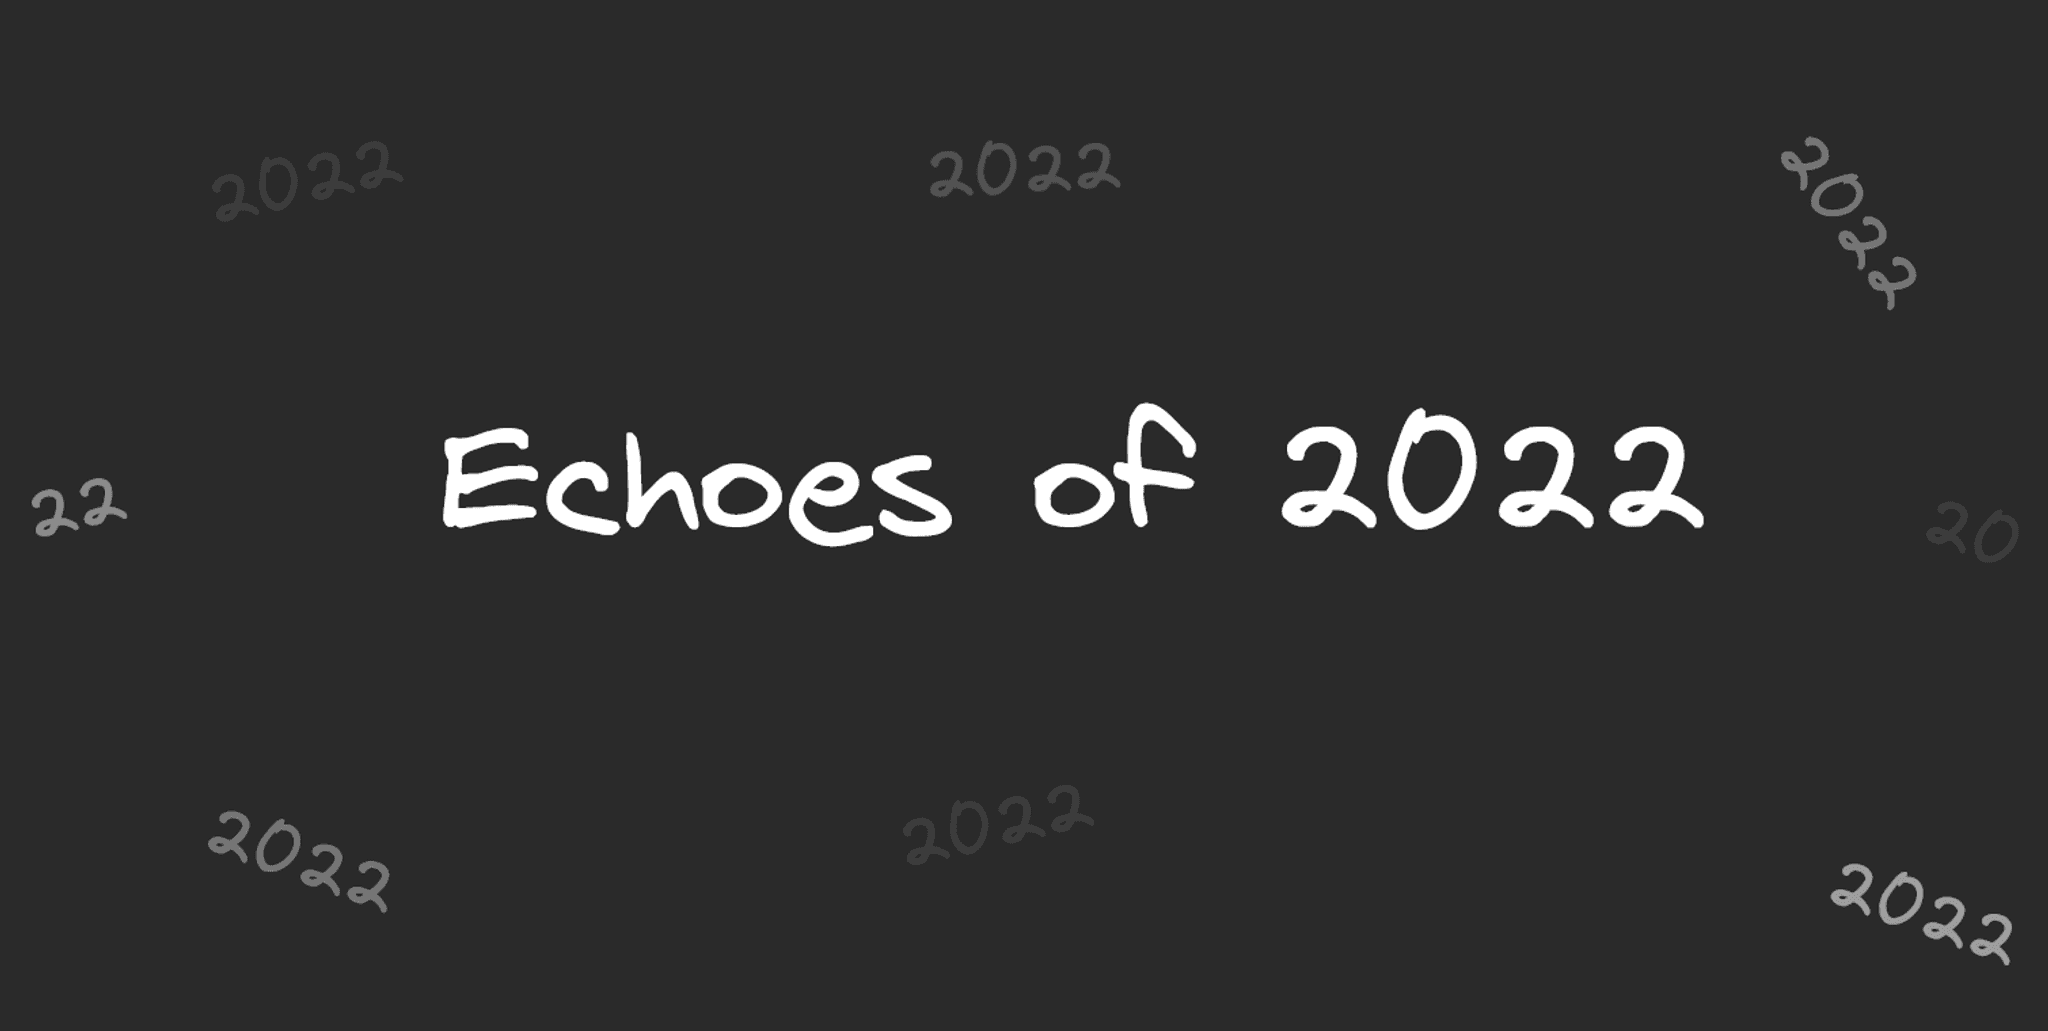 An image with the text "Echoes of 2022" at the center, with other faded "2022" words all over the place.